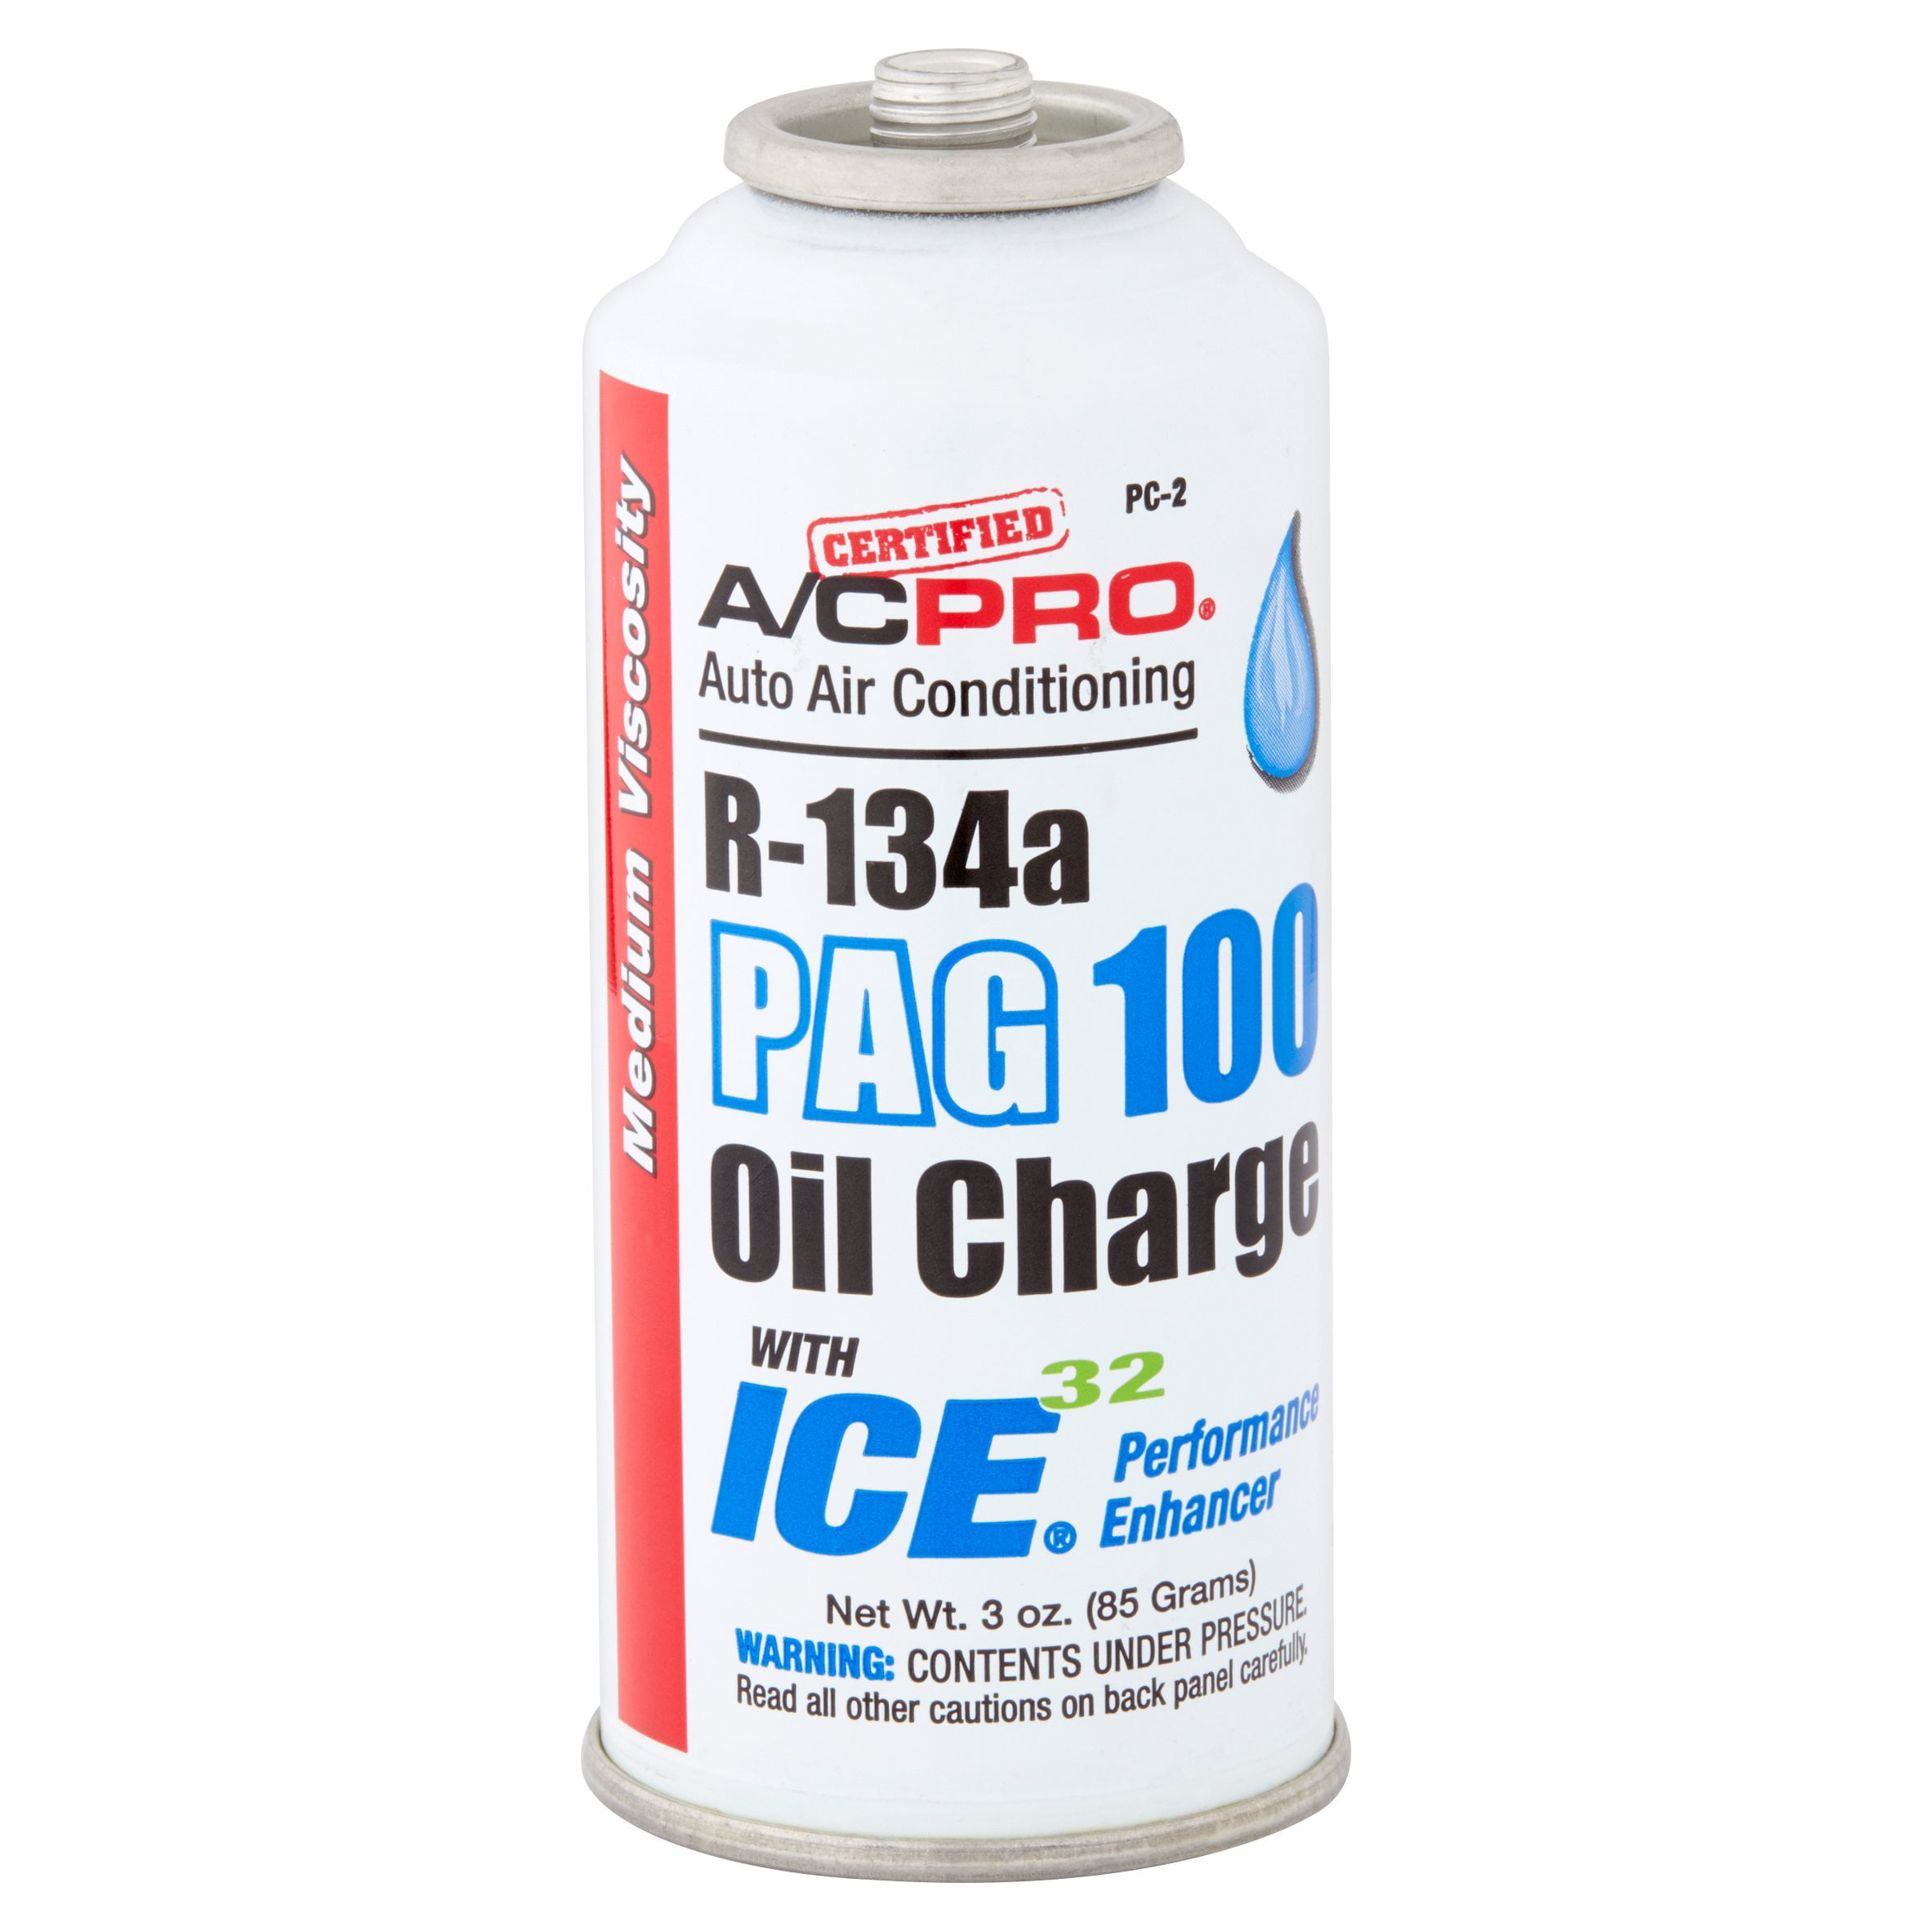 A C Pro Auto Air Conditioning R 134a PAG 100 With Ice 32 Oil Charge